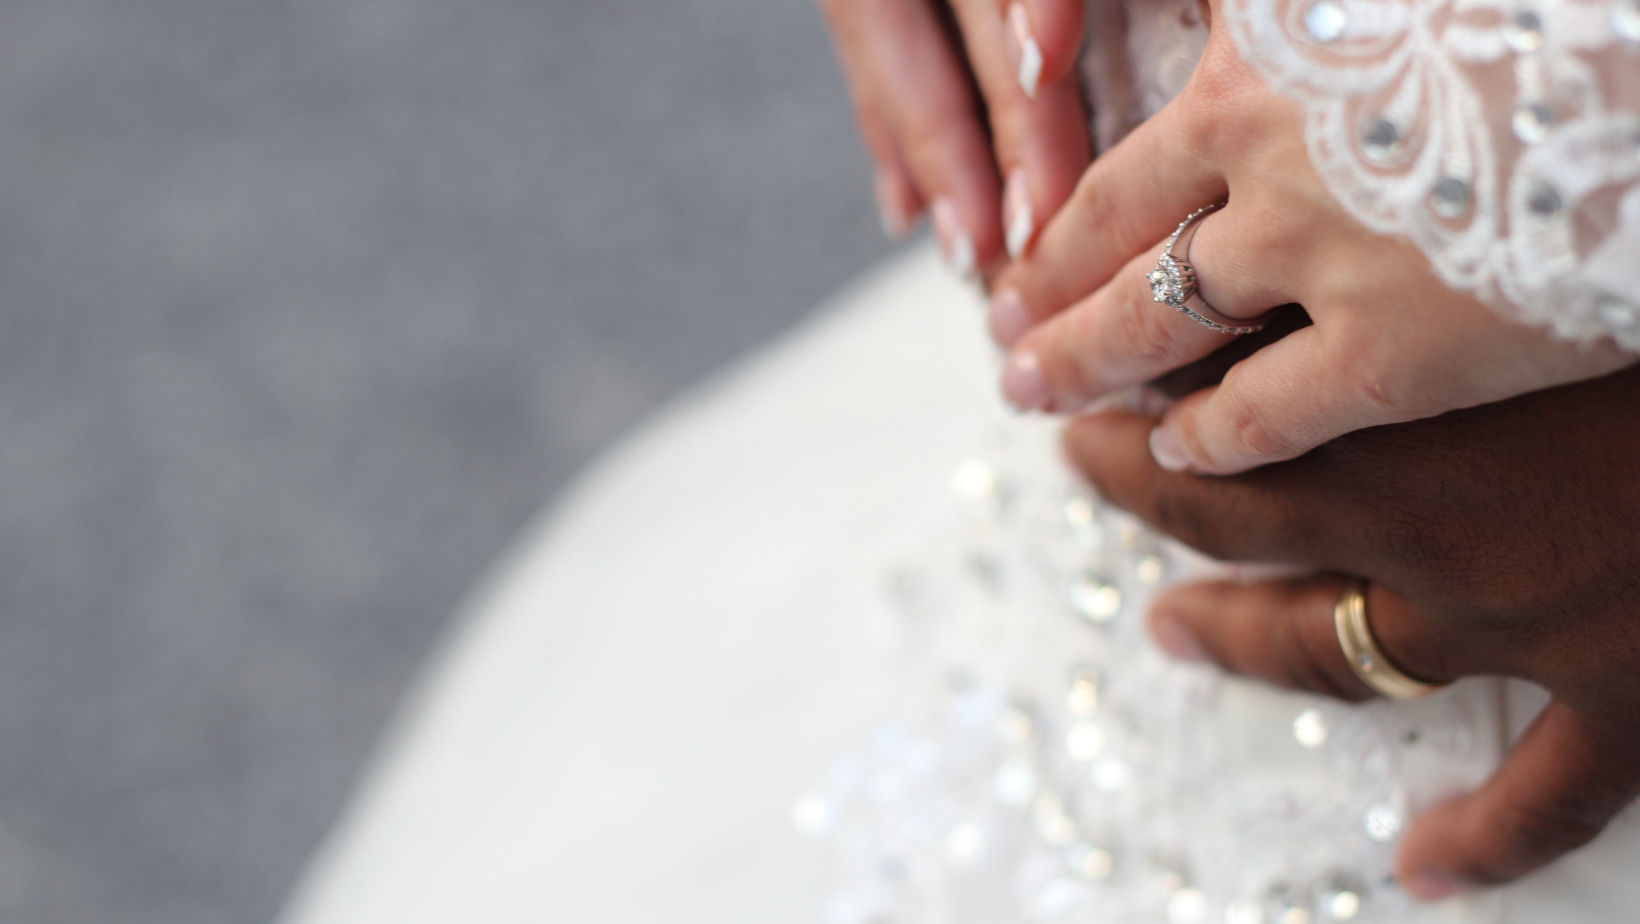 Top 5 Things to Know While Shopping for Bridal & Engagement Jewelry